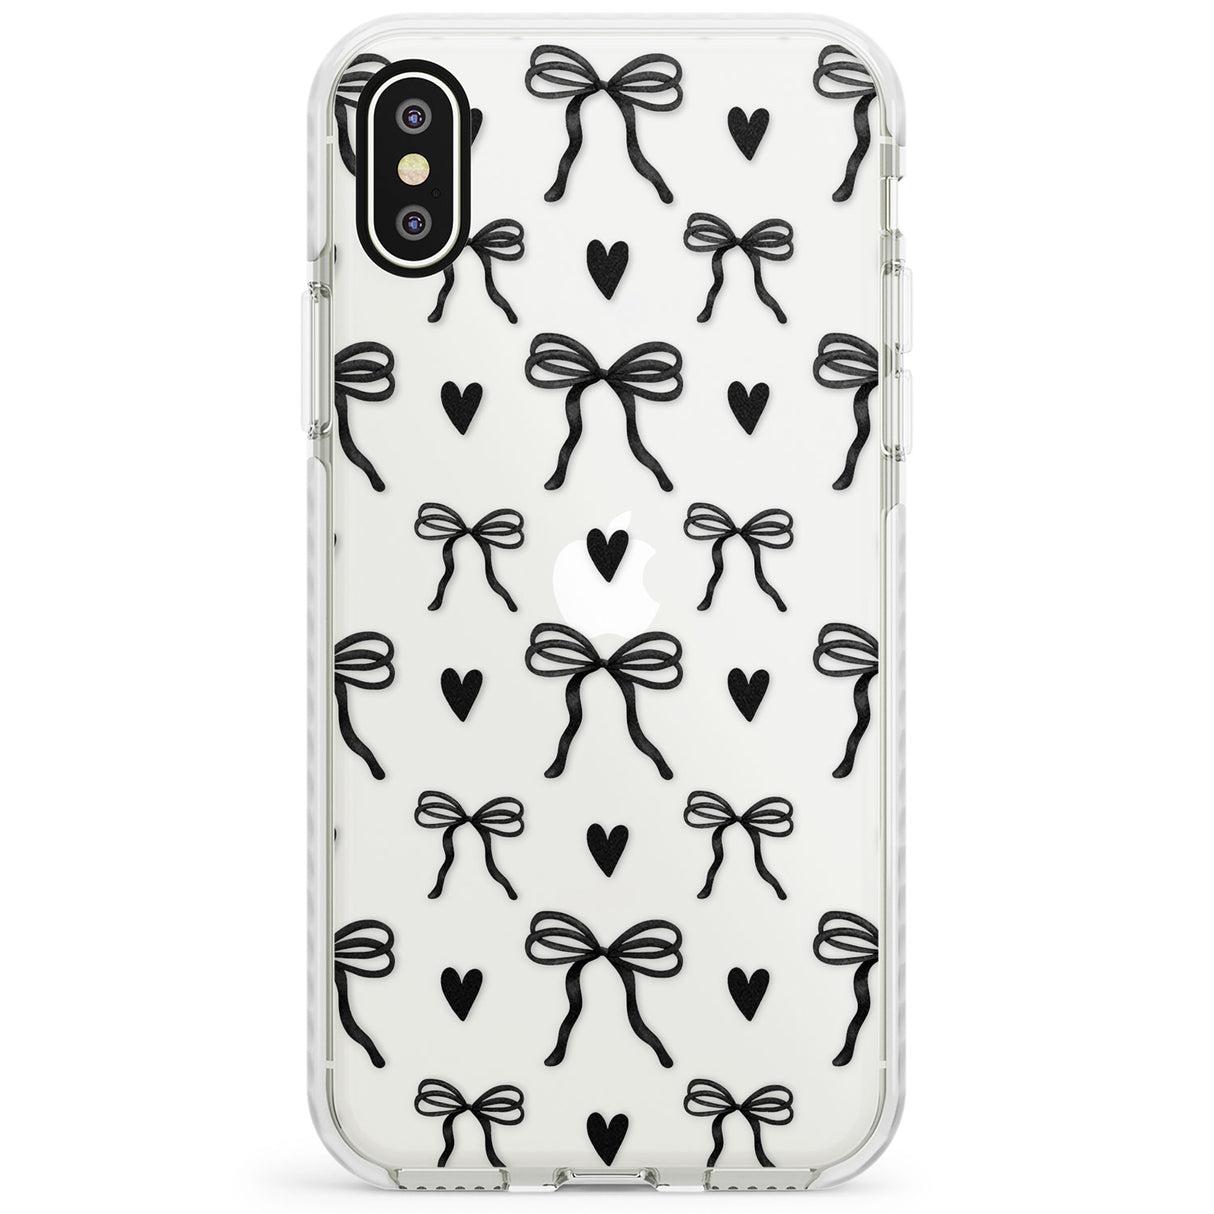 Black Bows & Hearts Impact Phone Case for iPhone X XS Max XR